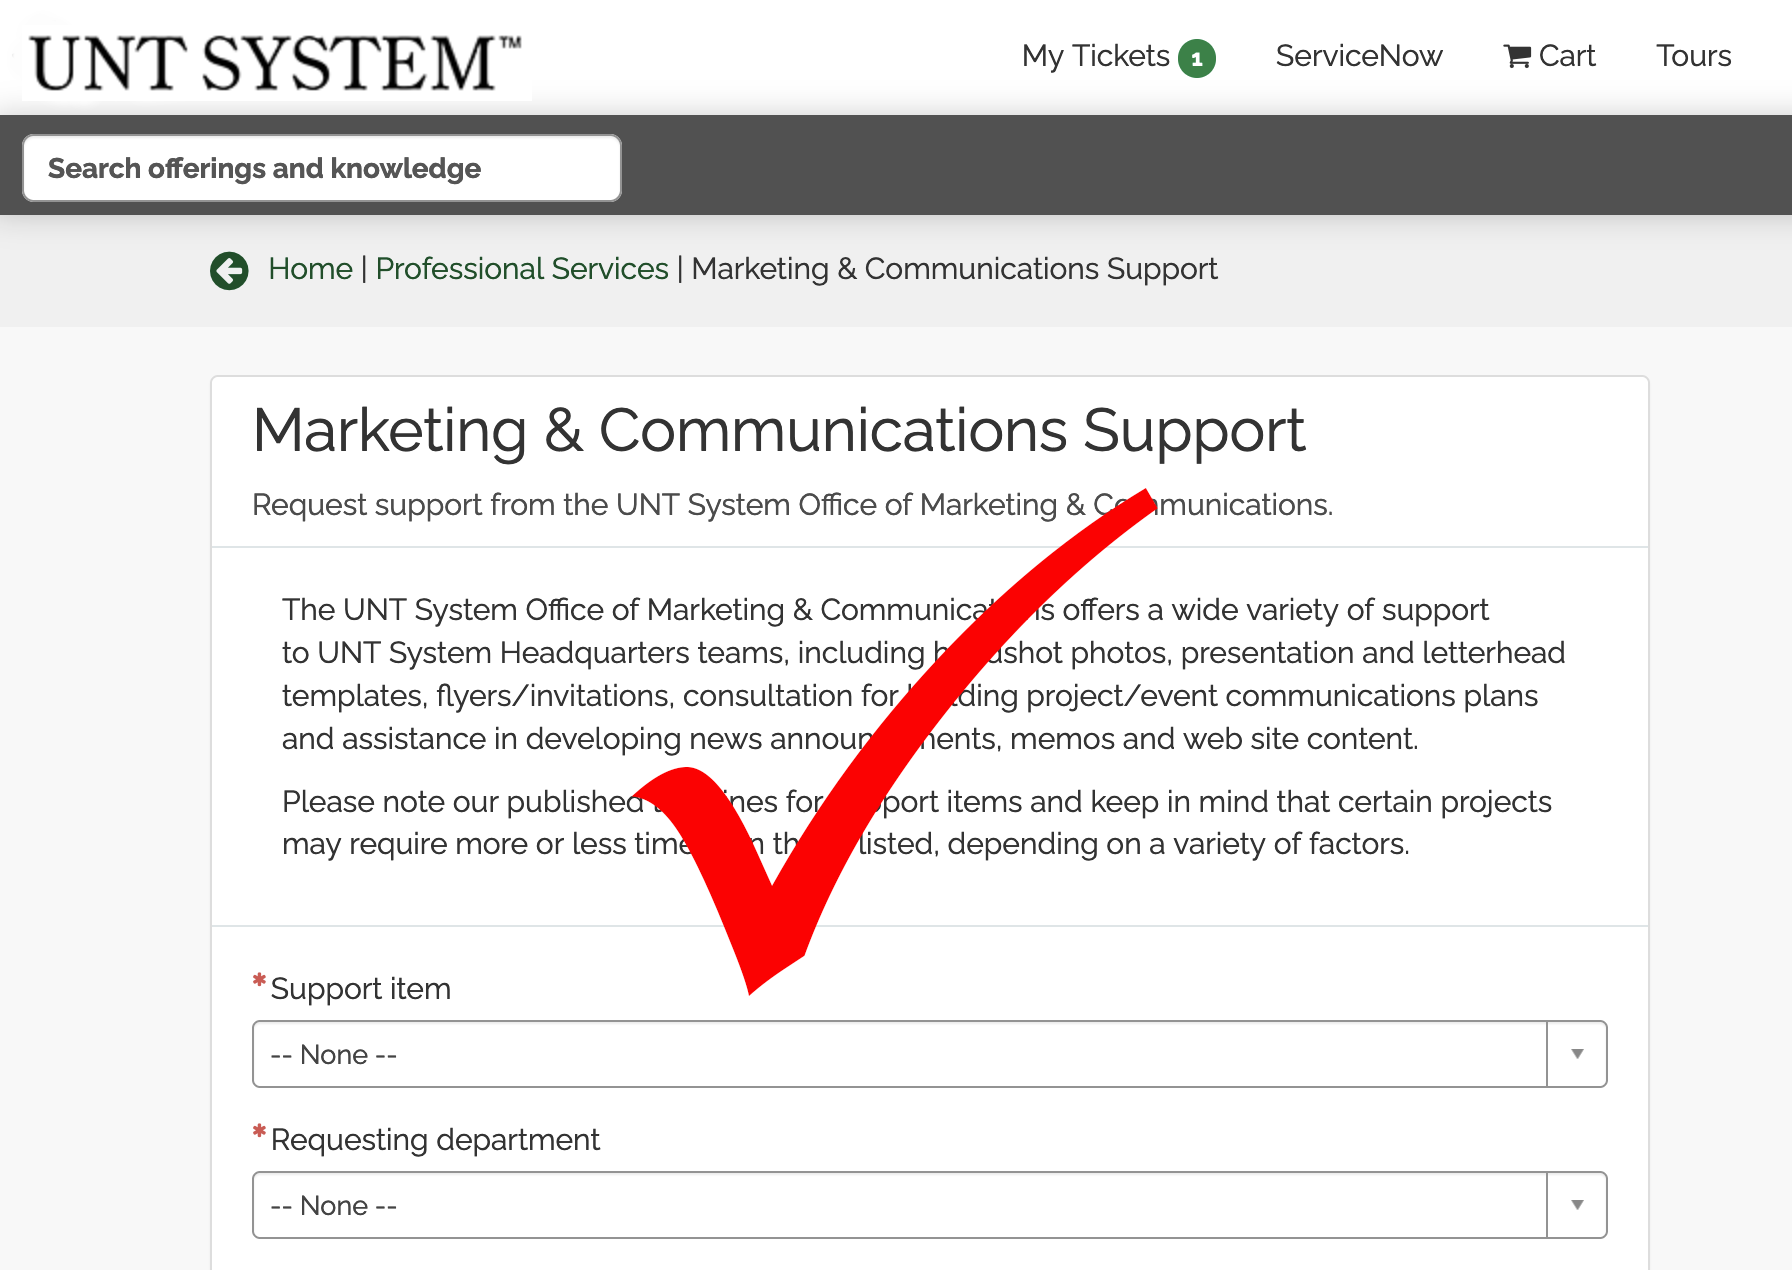 Make sure to submit your request at the correct portal for Marketing & Communications